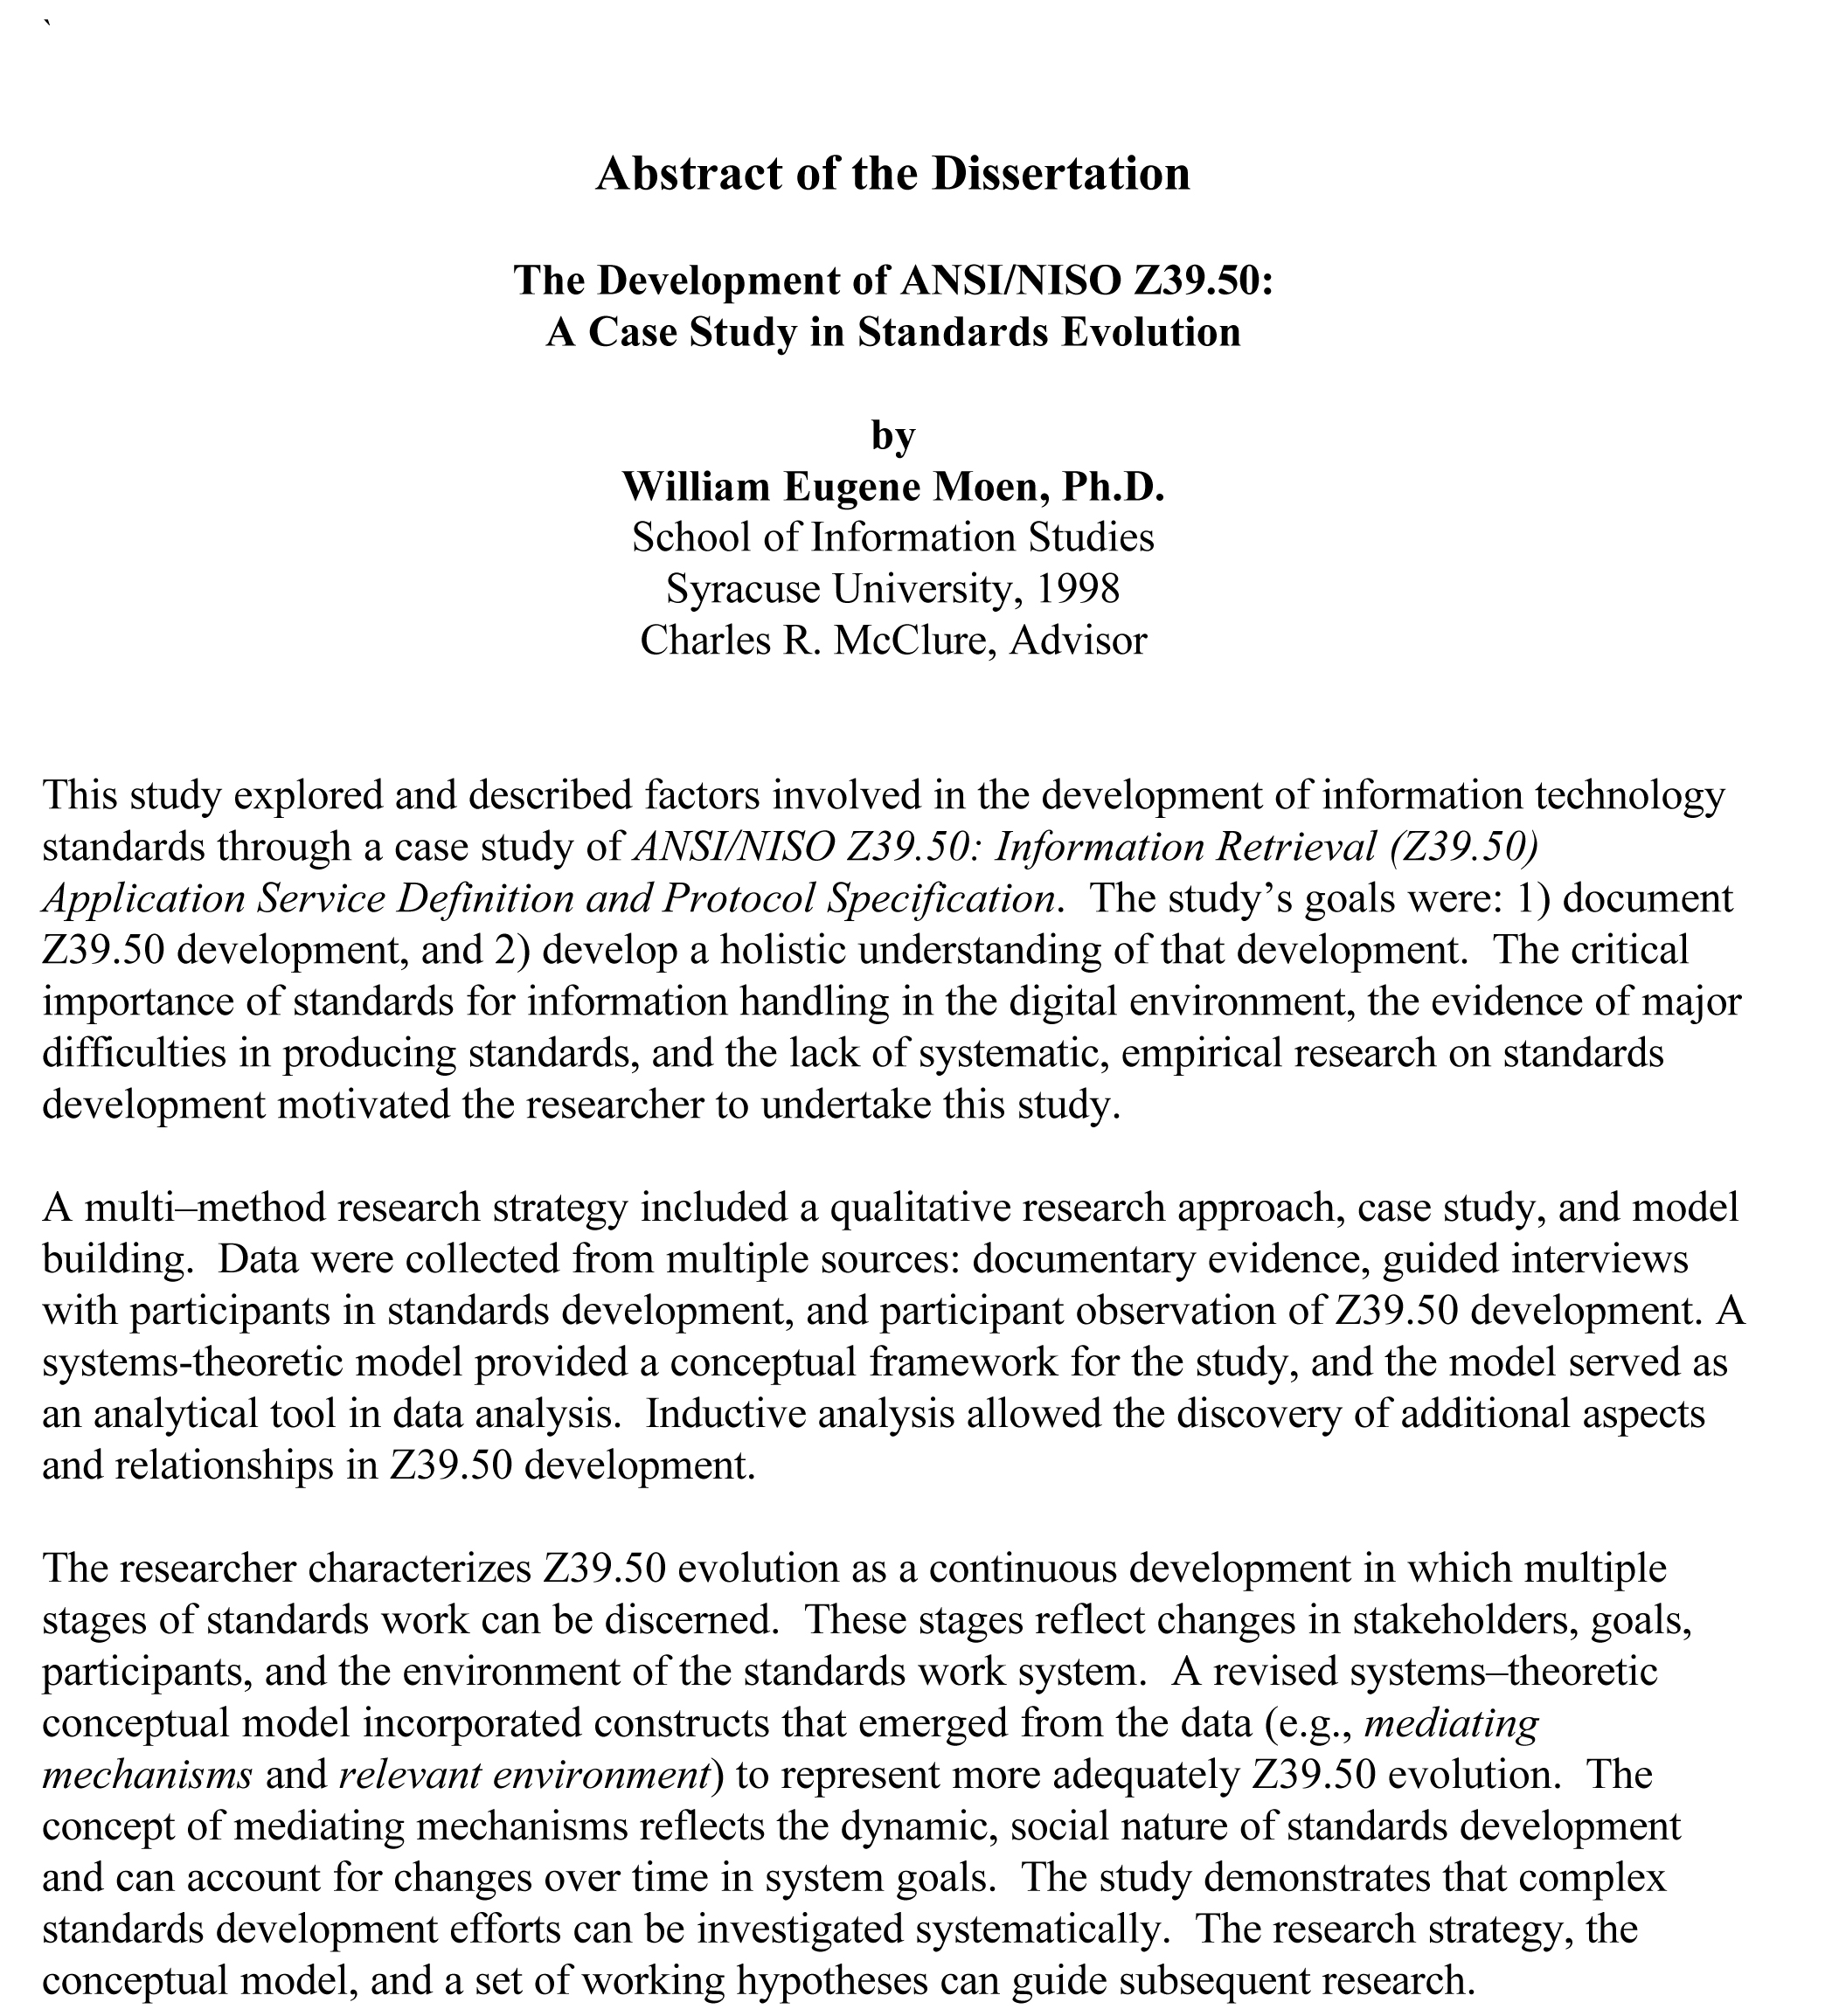 How to write an abstract for dissertation